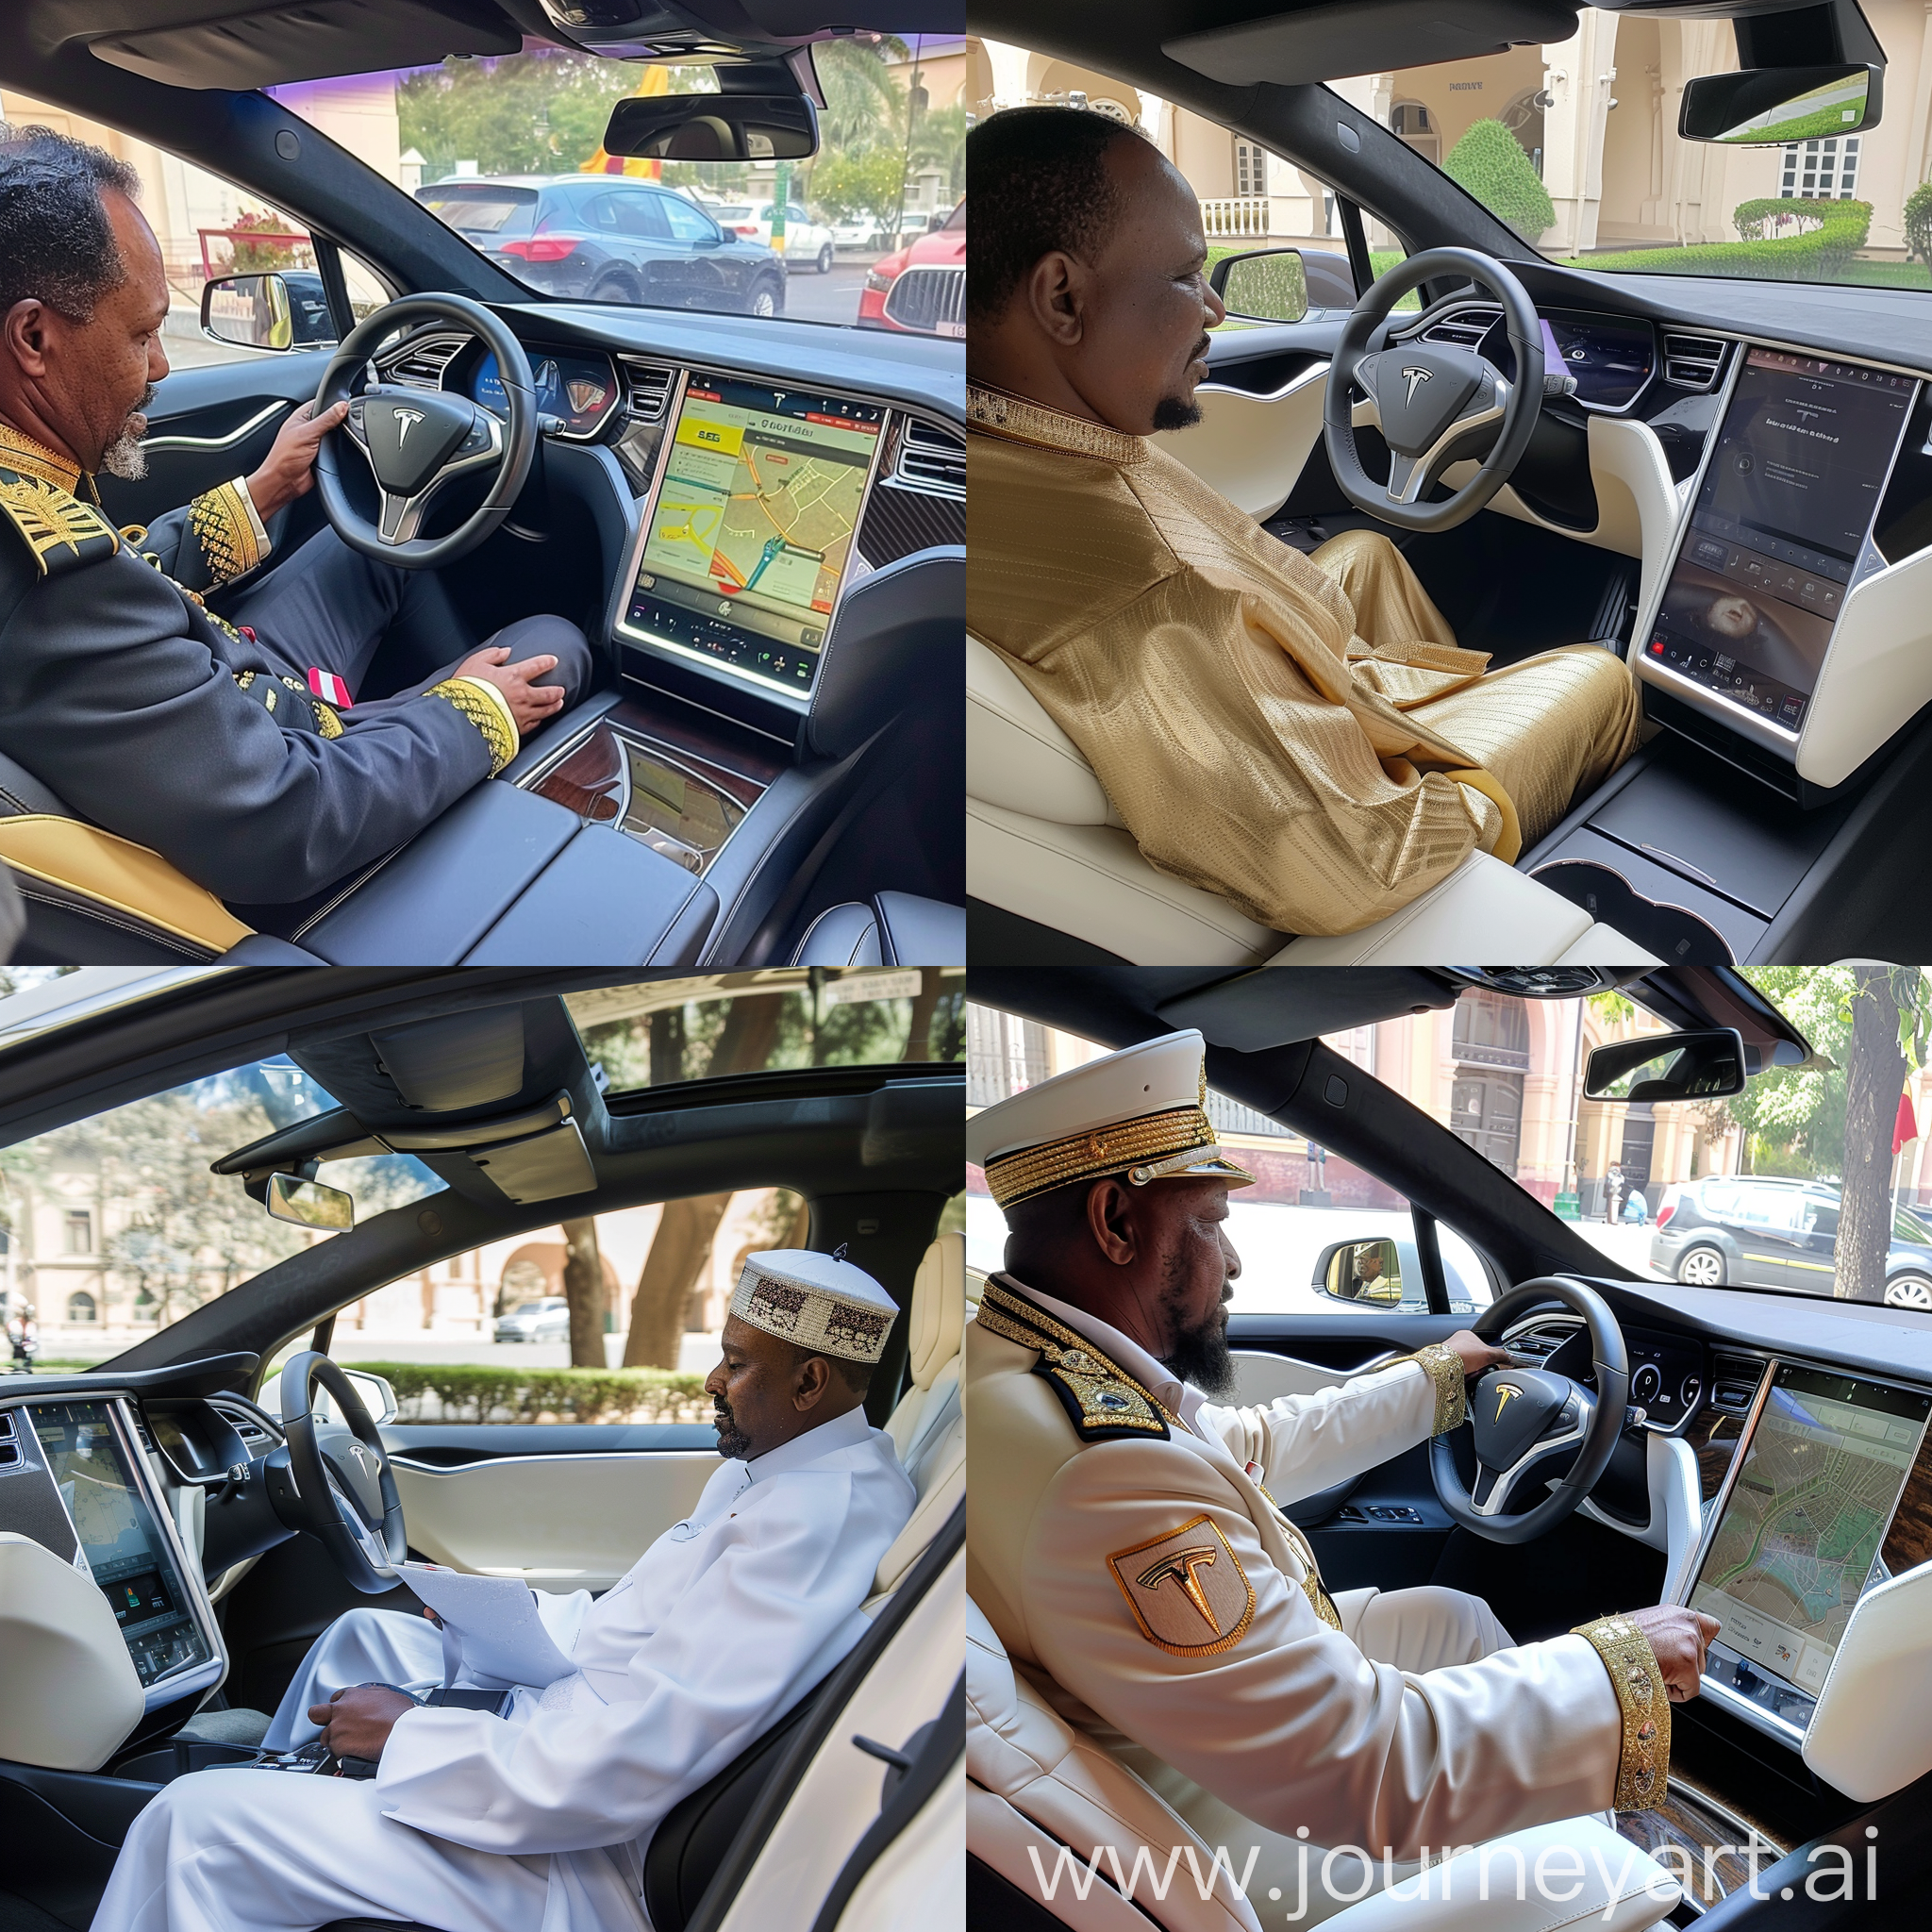 King Tewodros second of Ethiopia driving Tesla model x, show inside the car